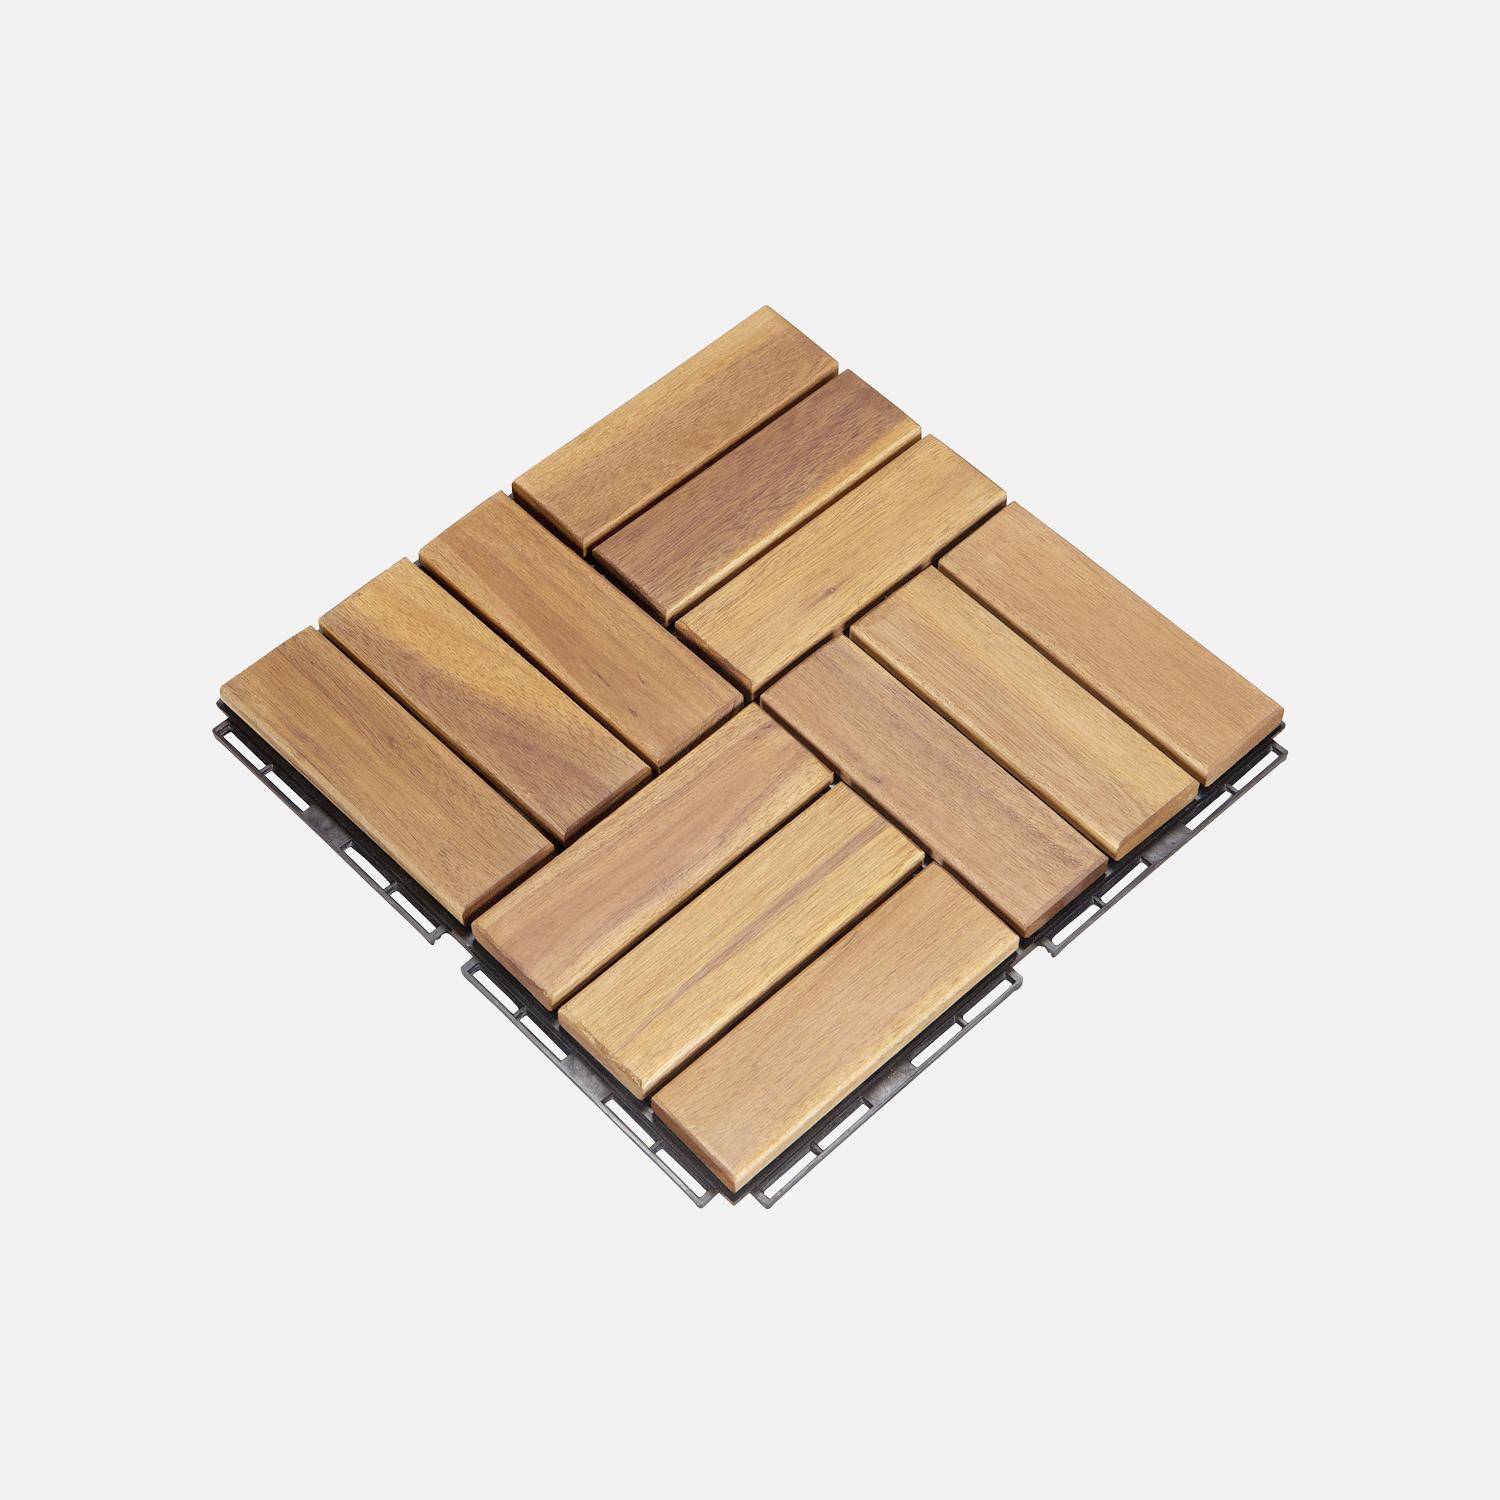 Batch of 36 acacia wood decking tiles 30x30cm, square pattern, clip-on,sweeek,Photo2